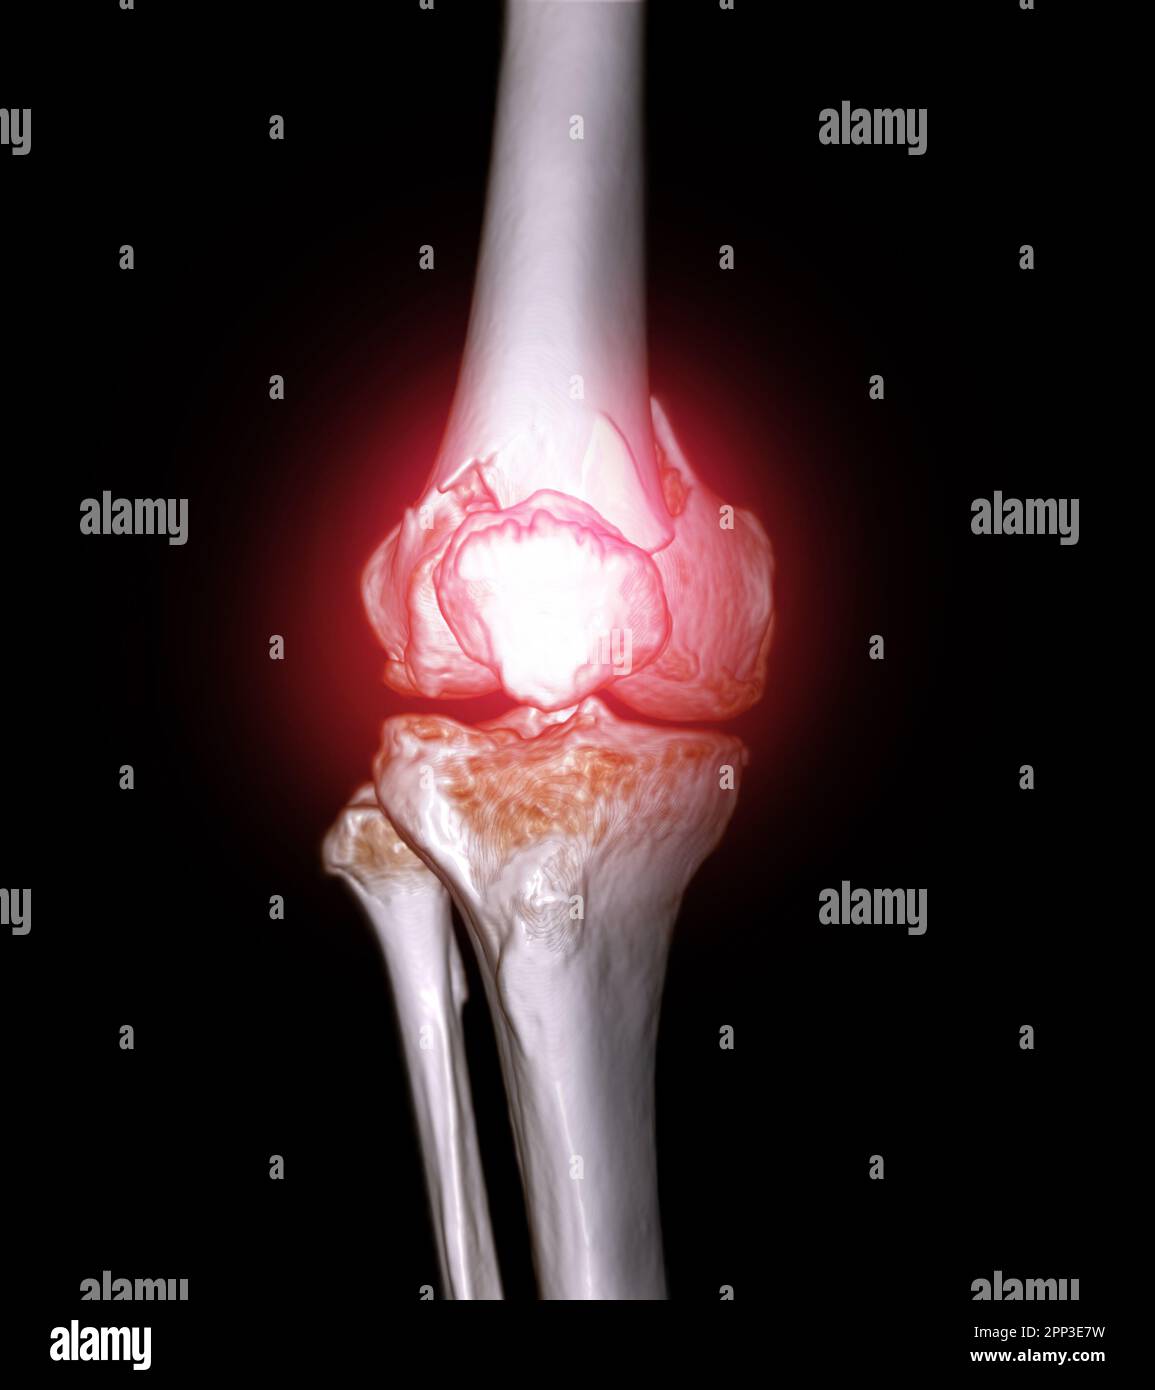 CT scan of knee joint 3D rendering image  showing fracture of distal femur bone. Stock Photo